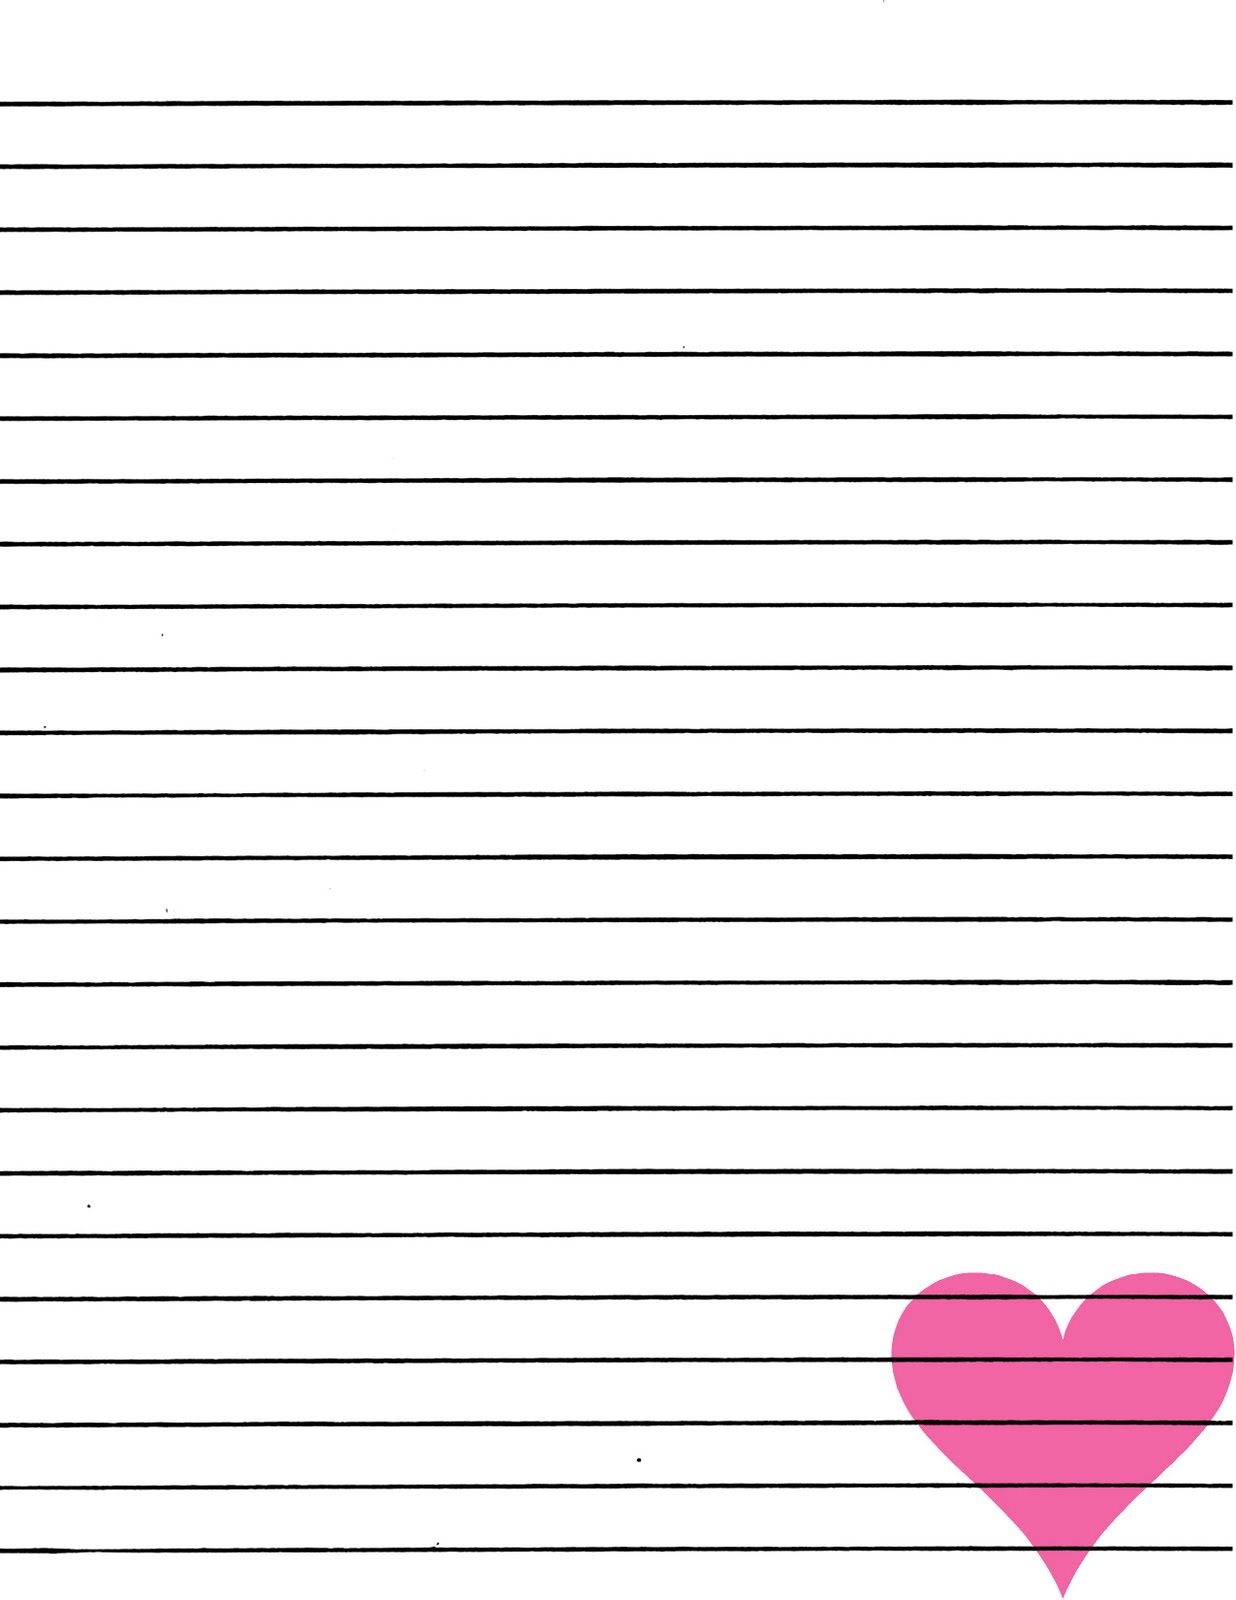 Printable lined paper a4 size